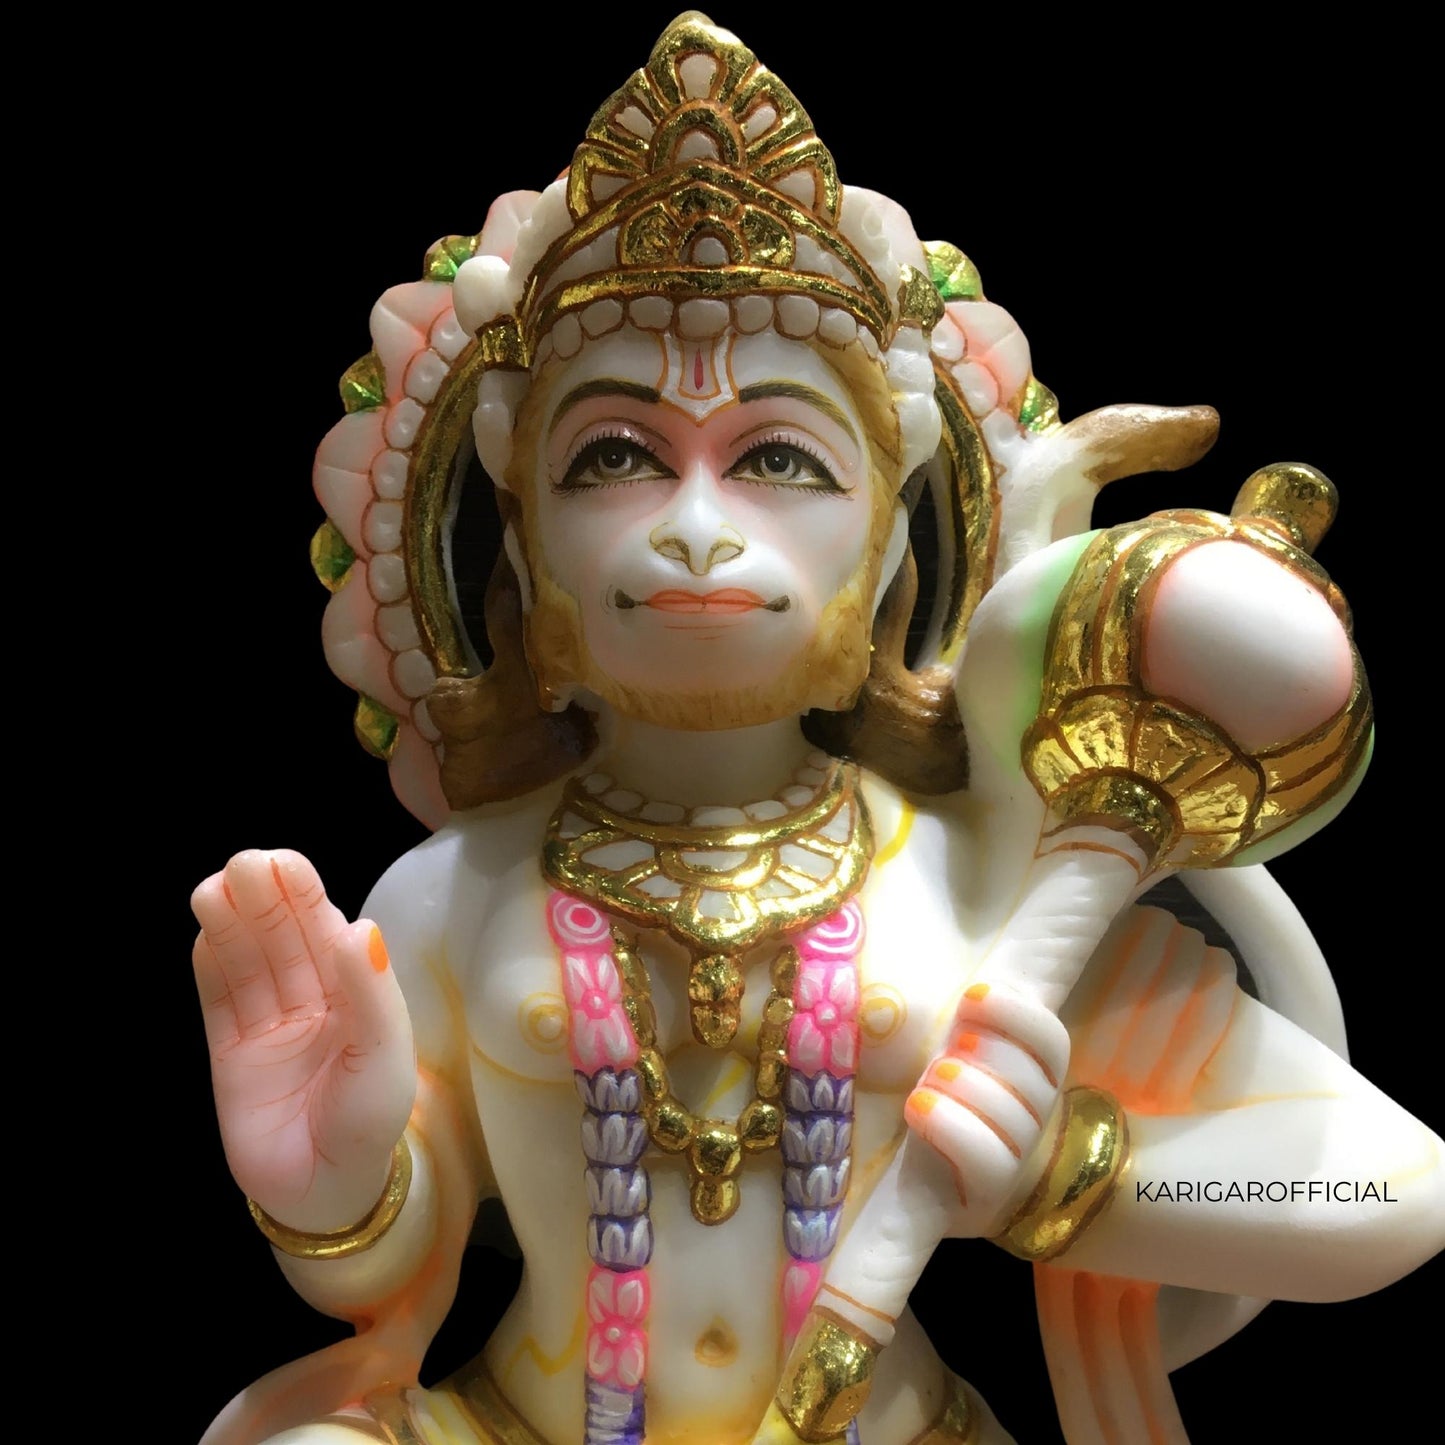 Hanuman Statue, Gold leaf work Large 12 inches Marble Bajrang Bali Murti, Hindu Monkey god Handpainted Multicolor Figurine, Perfect for Small Home Temple Decoration, Housewarming Gifts Sculpture